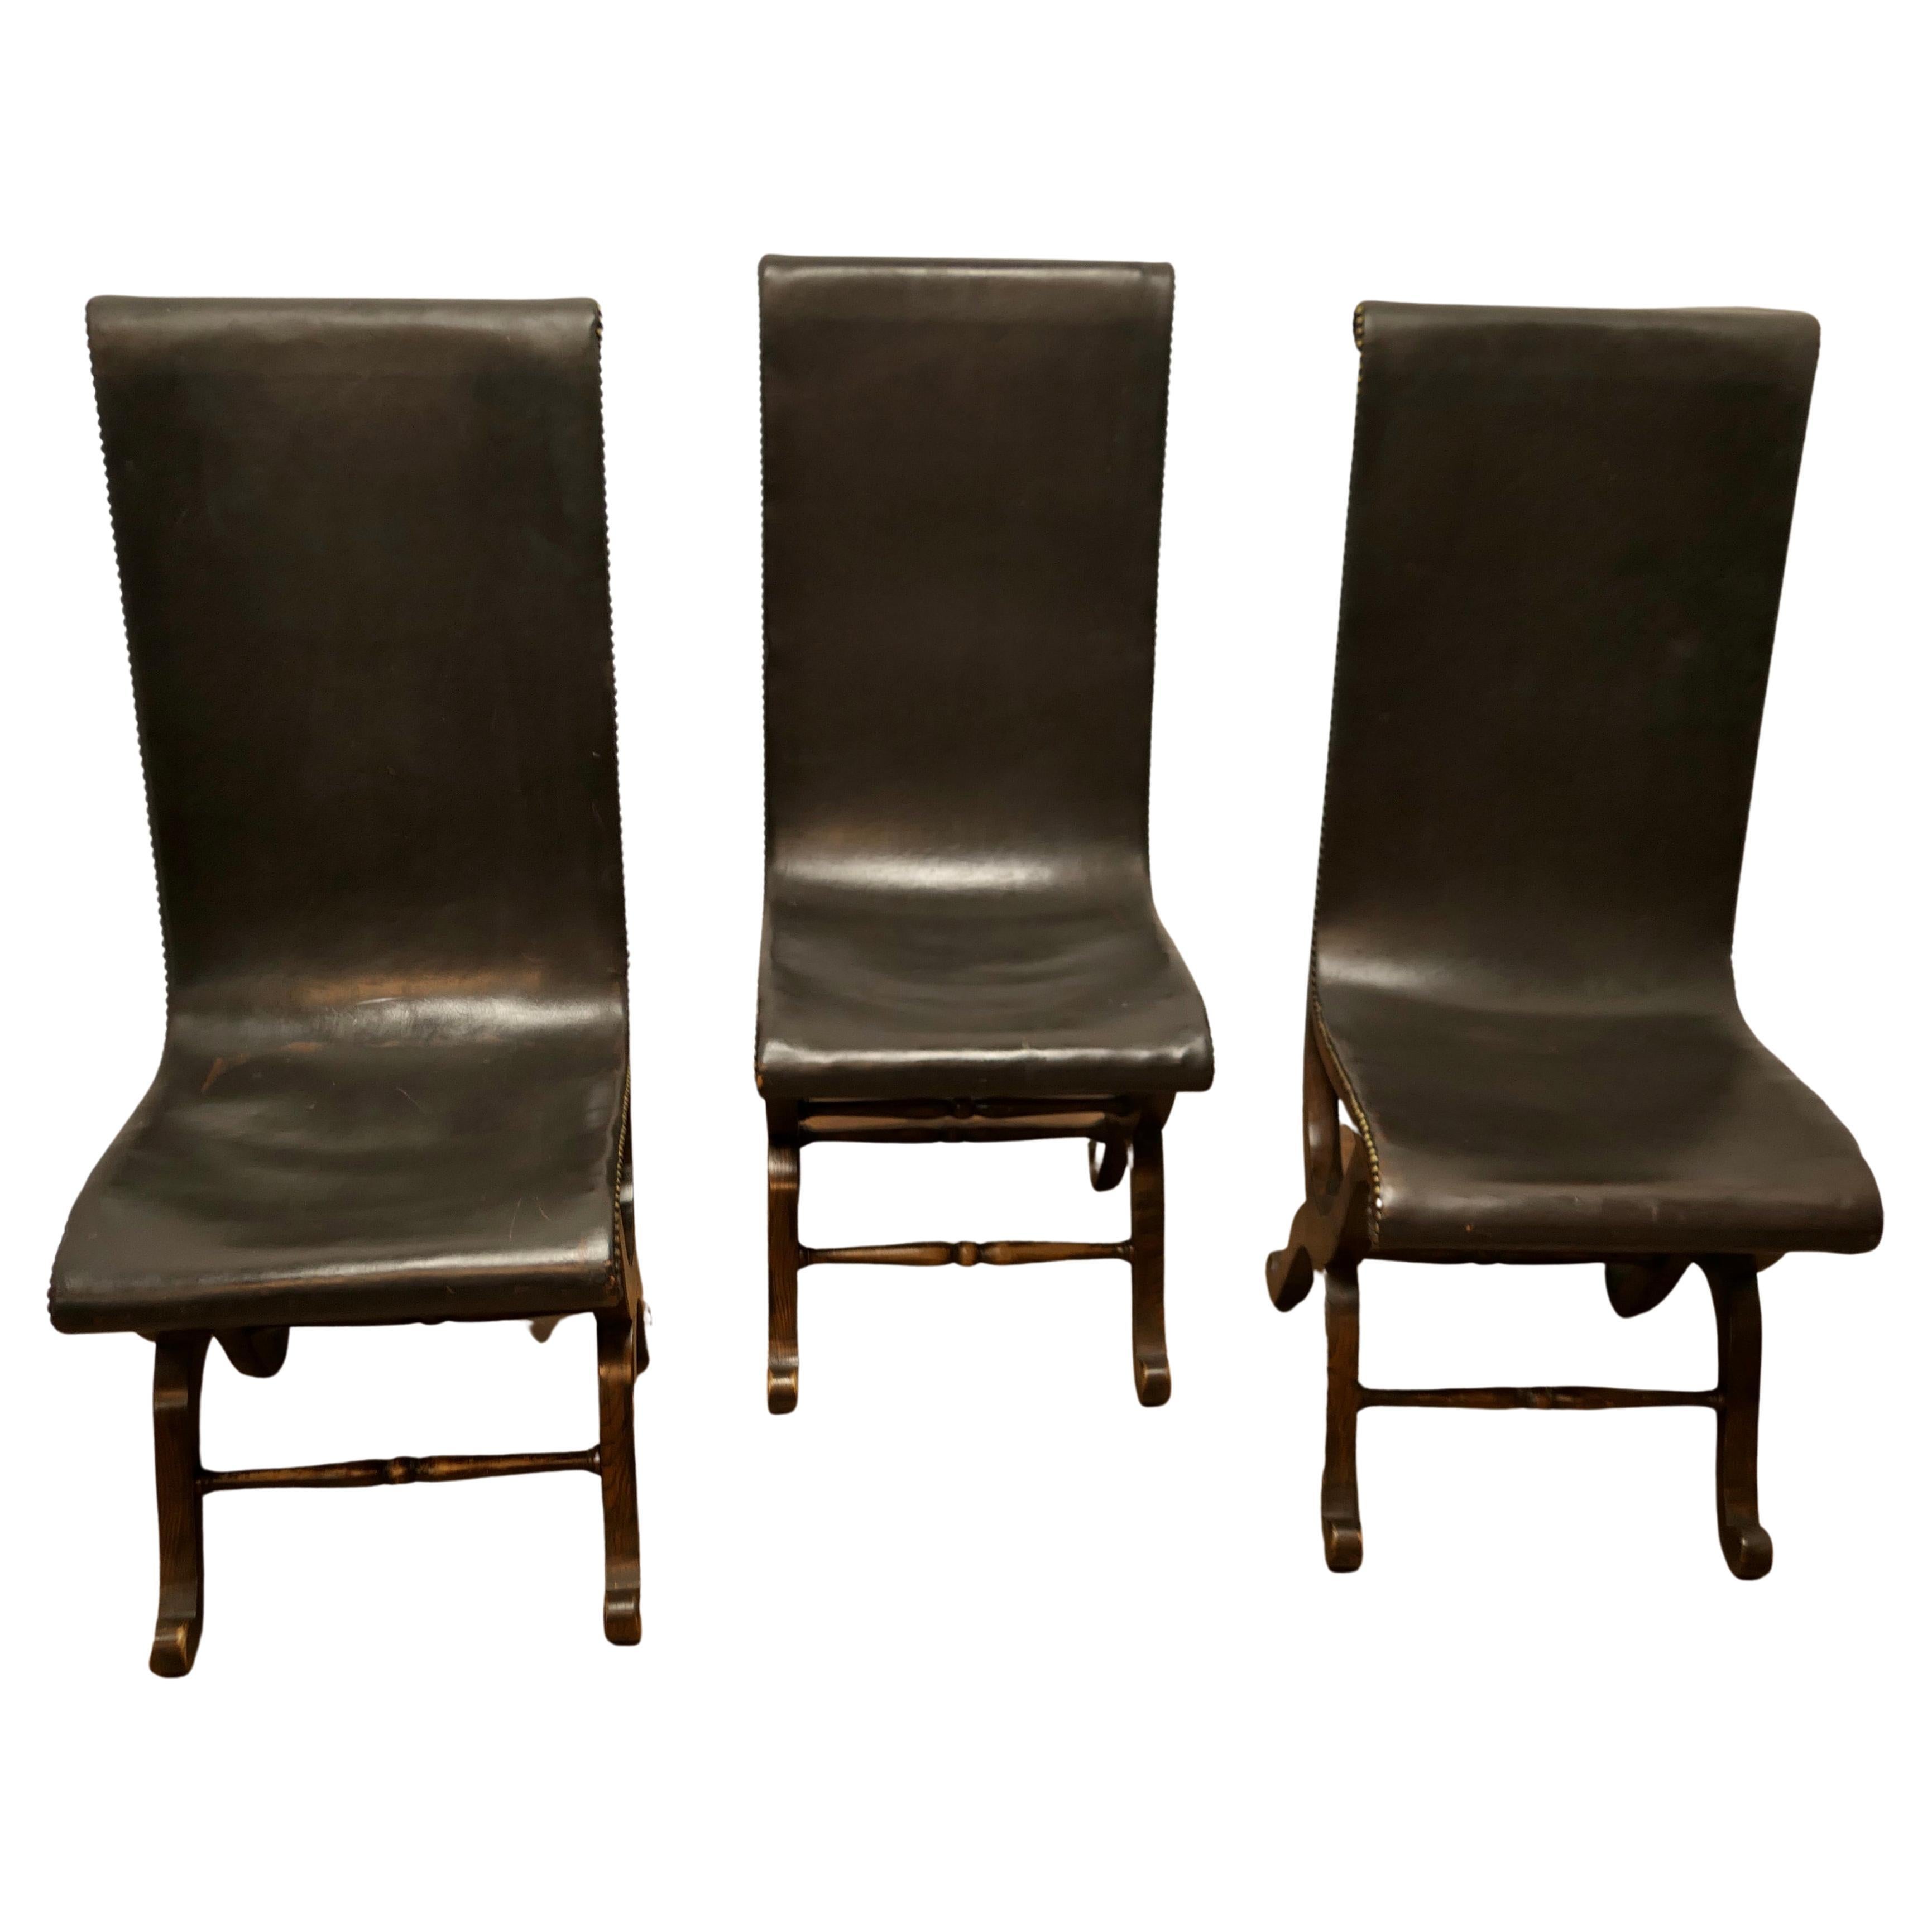 3 Matching Midcentury Leather and Oak Fireside Sling Chairs by Pierre Lottier  For Sale